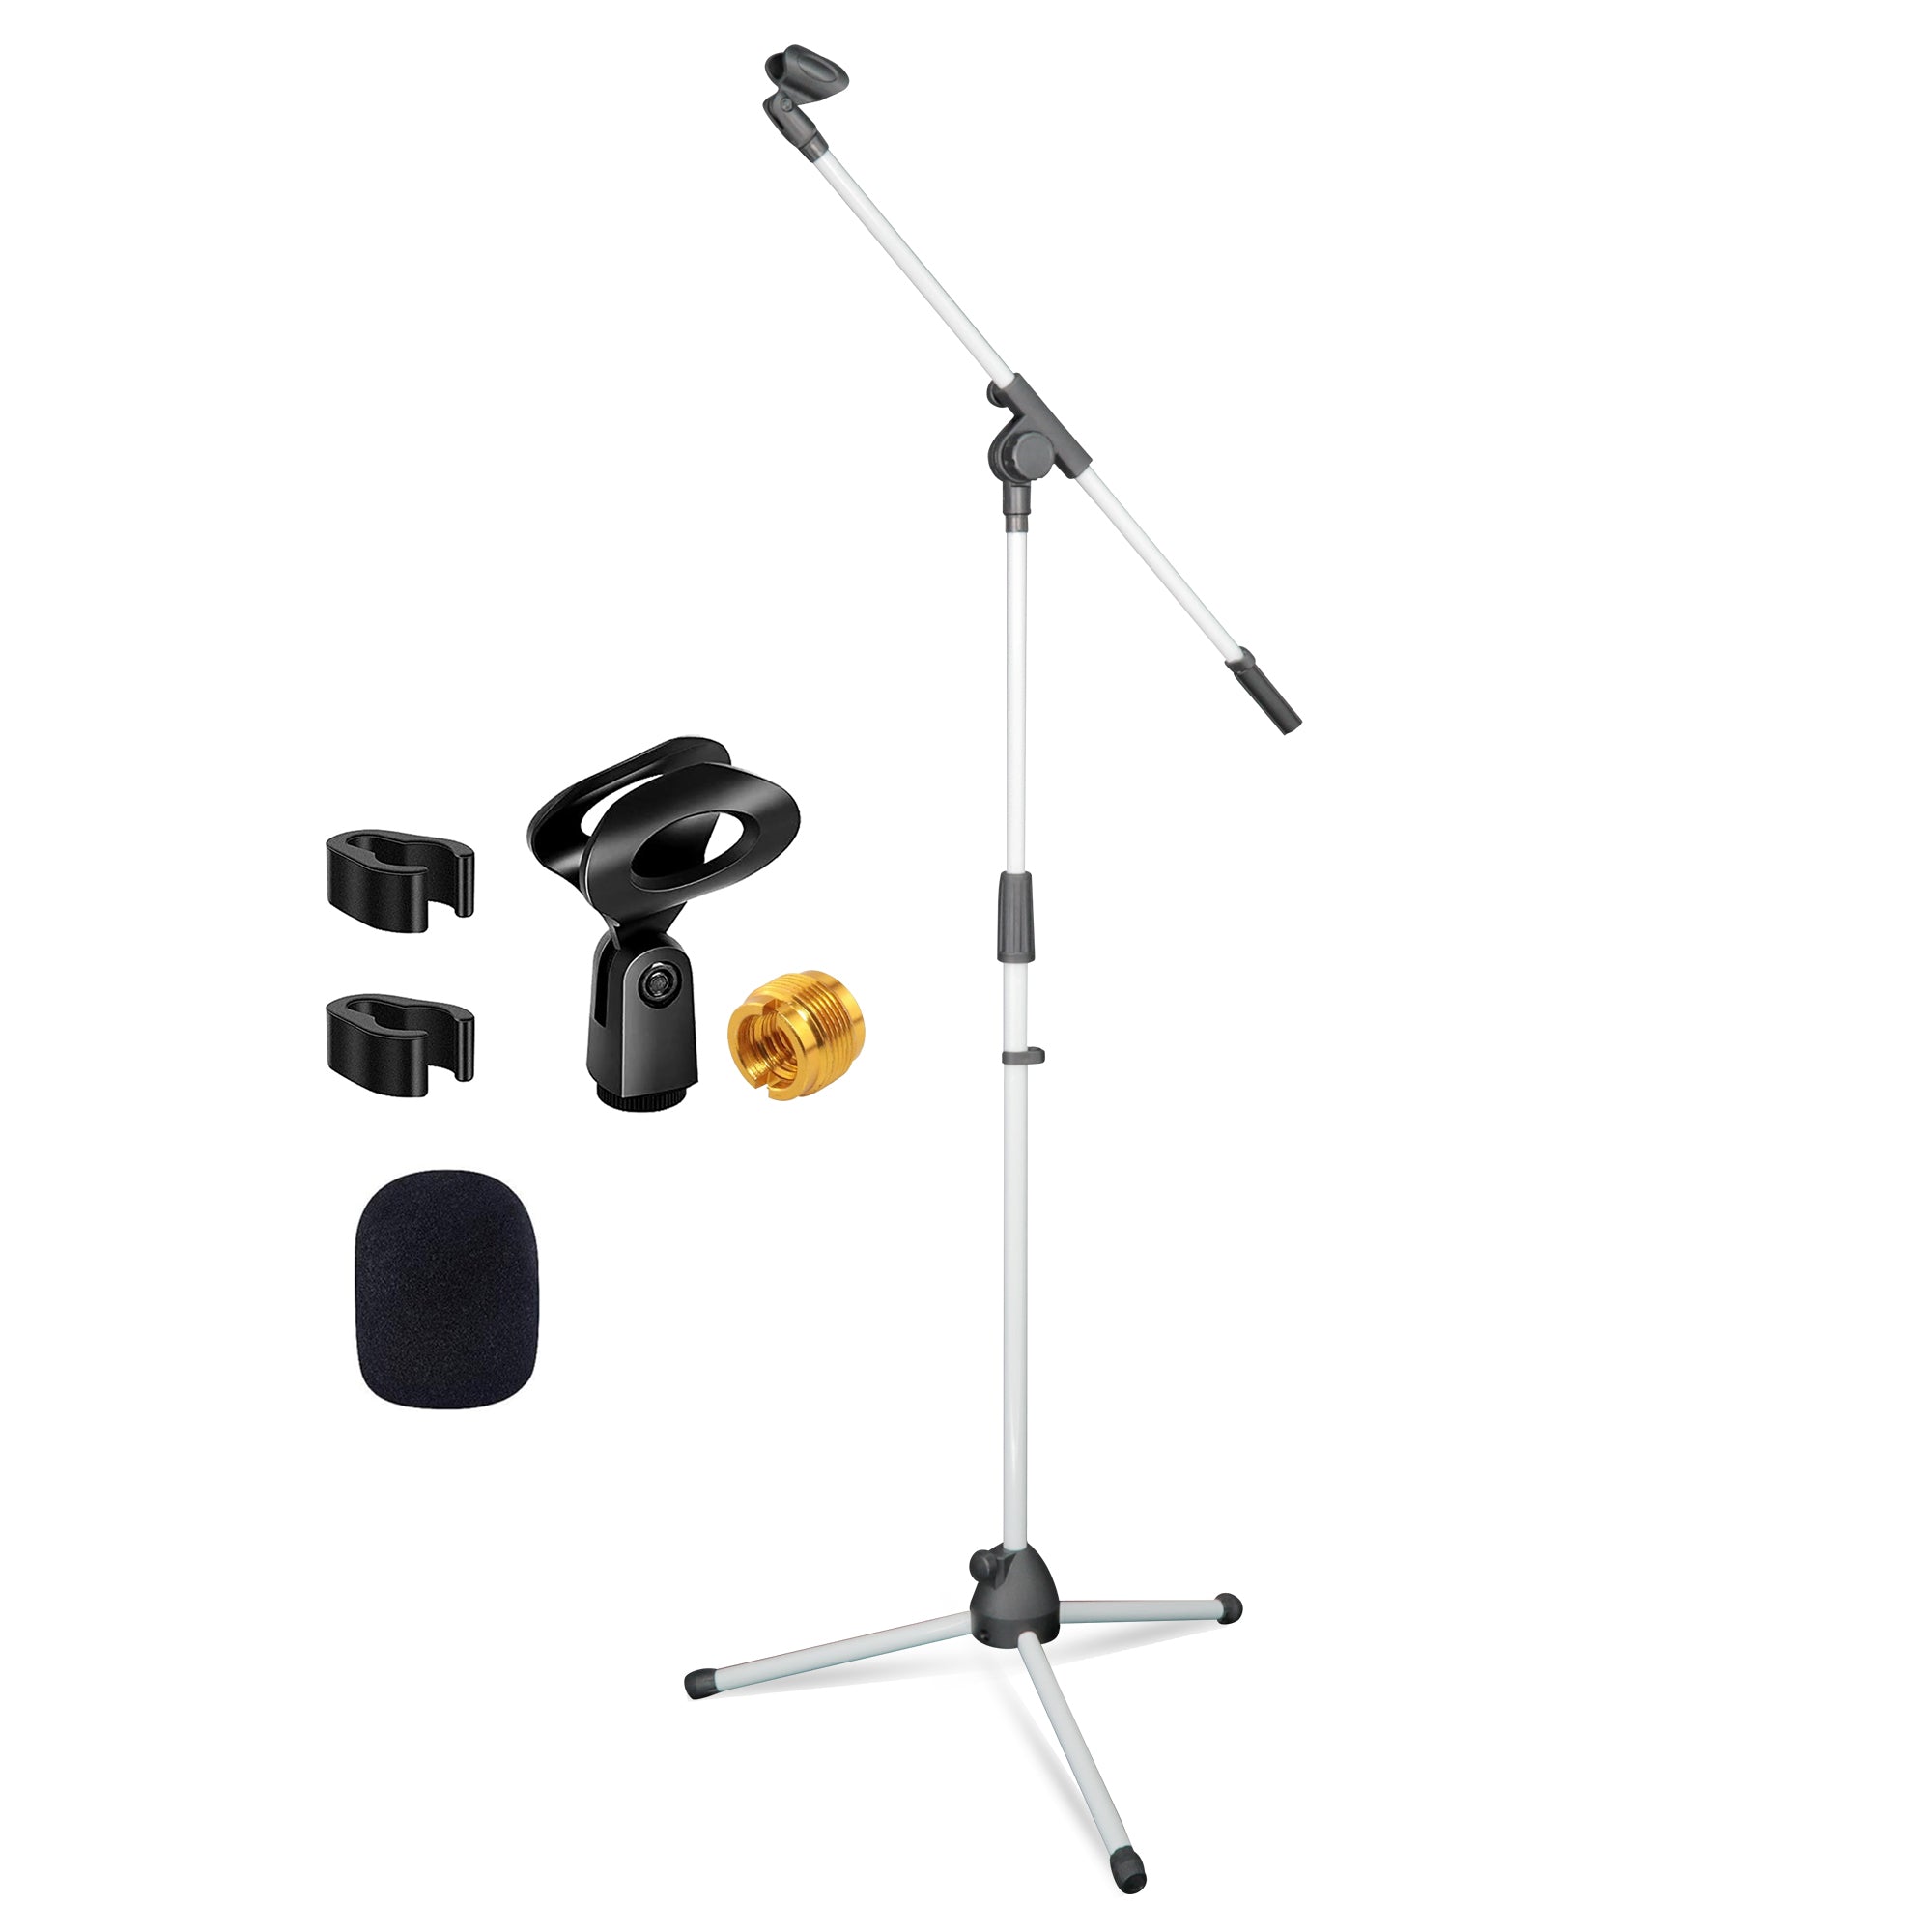 5 Core Mic Stand White 1 Piece Collapsible Height Adjustable Up to 6ft Metal Microphone Tripod Stand w Boom Arm Para Microfono for Singing Karaoke Speech Stage Recording - MS 080 WH